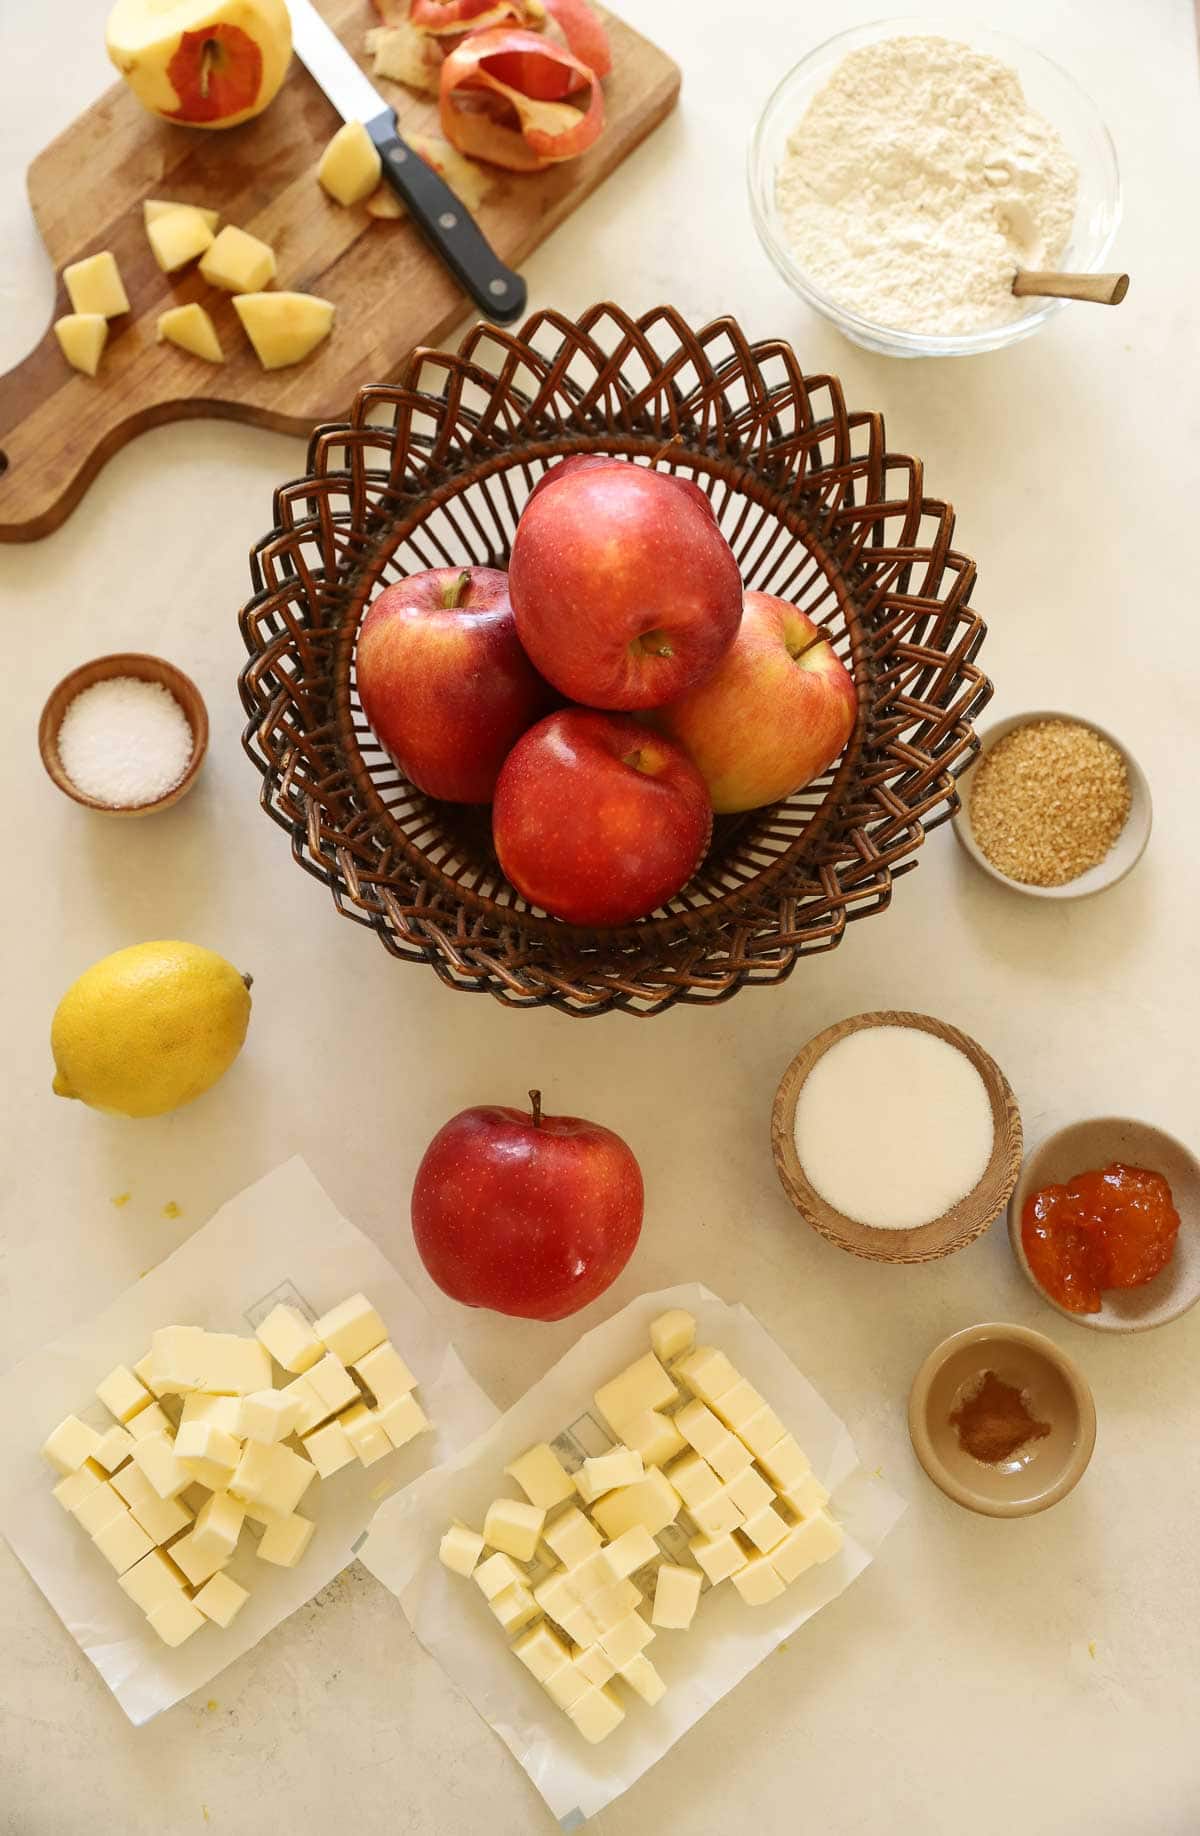 apples, butterm sugar, and other ingredients for pie making on a counter.